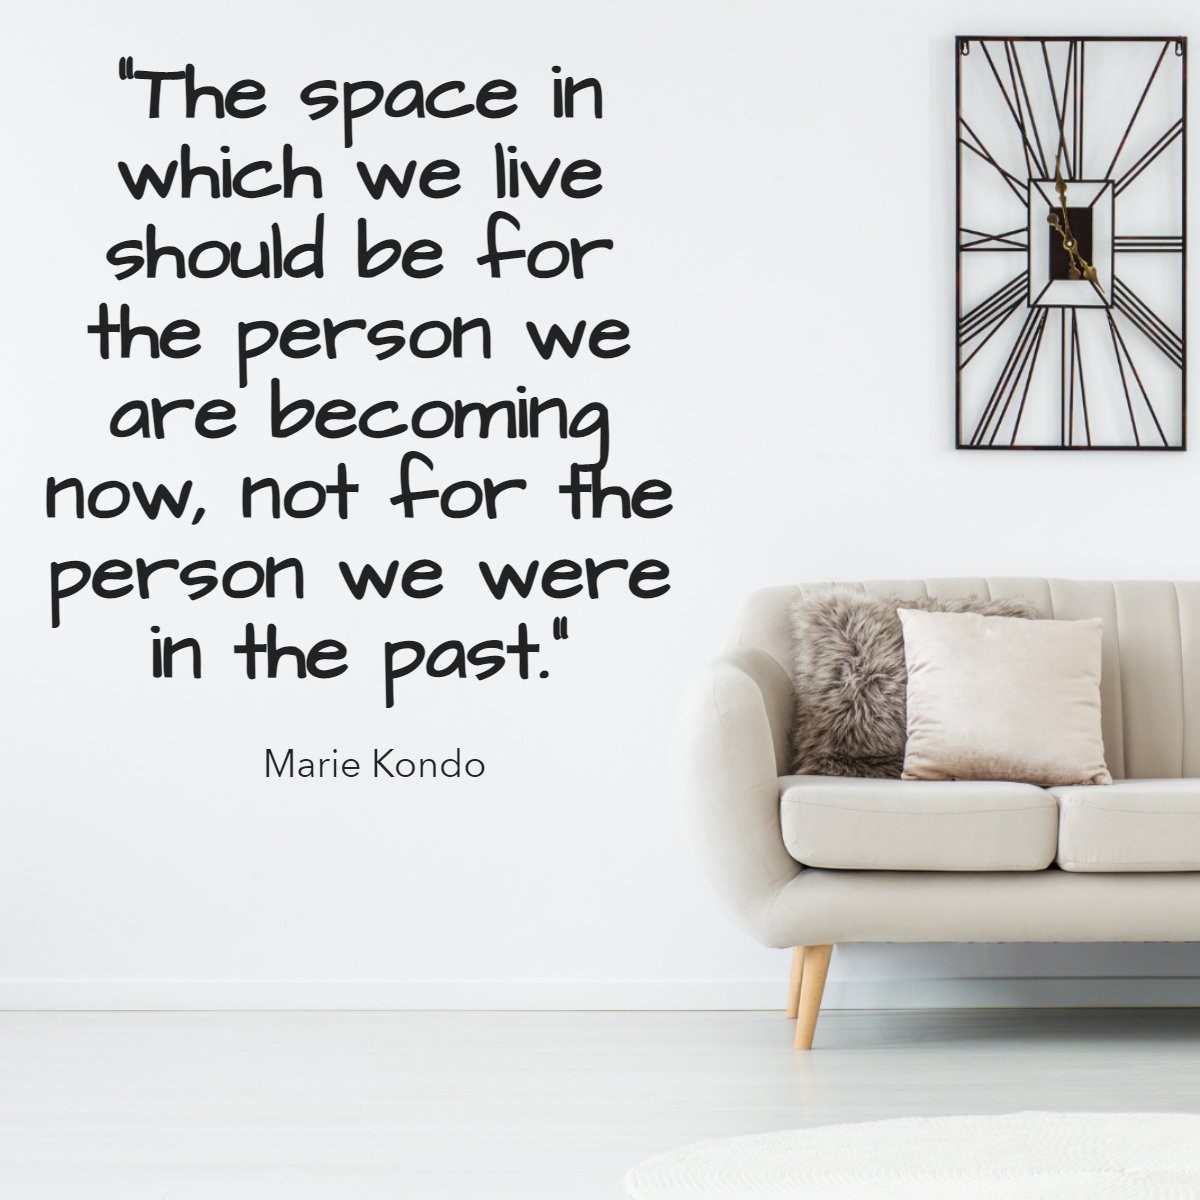 'The space in which we live should be for the person we are becoming now, not for the person we were in the past.' 
― Marie Kondo 📖

#space #realestate #room #buy #sell #property #home #house #quoteoftheday #mariekondo #quotes
 #cincyrealtors #scavonerealtor